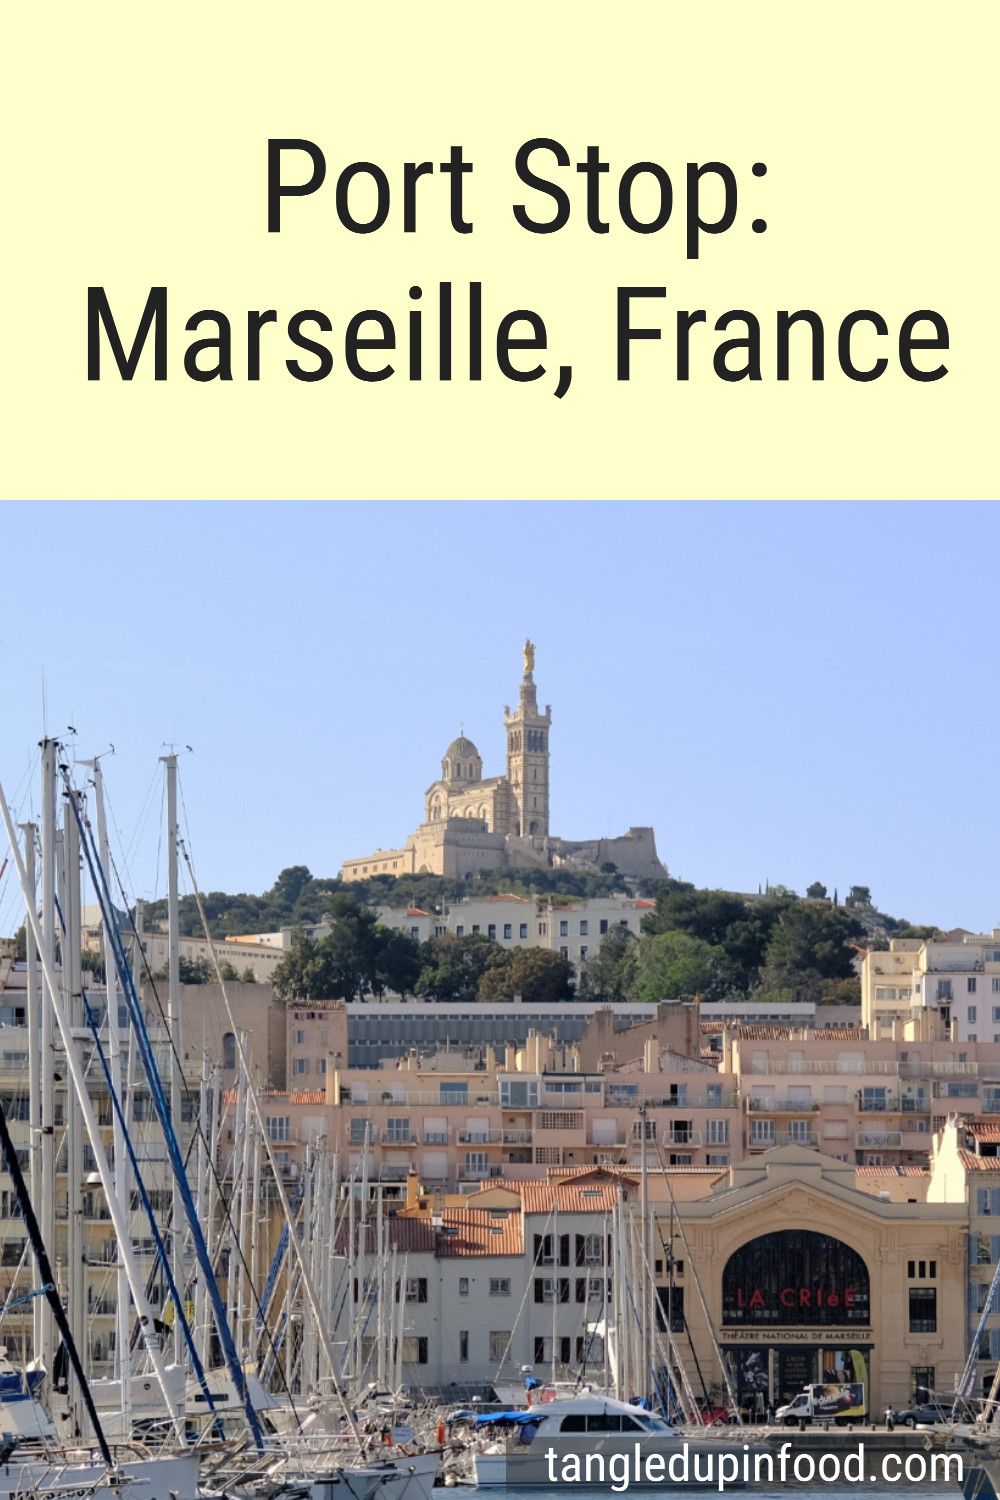 Photo of a marina with a church on a hill in the background with text reading "Port Stop: Marseille, France"